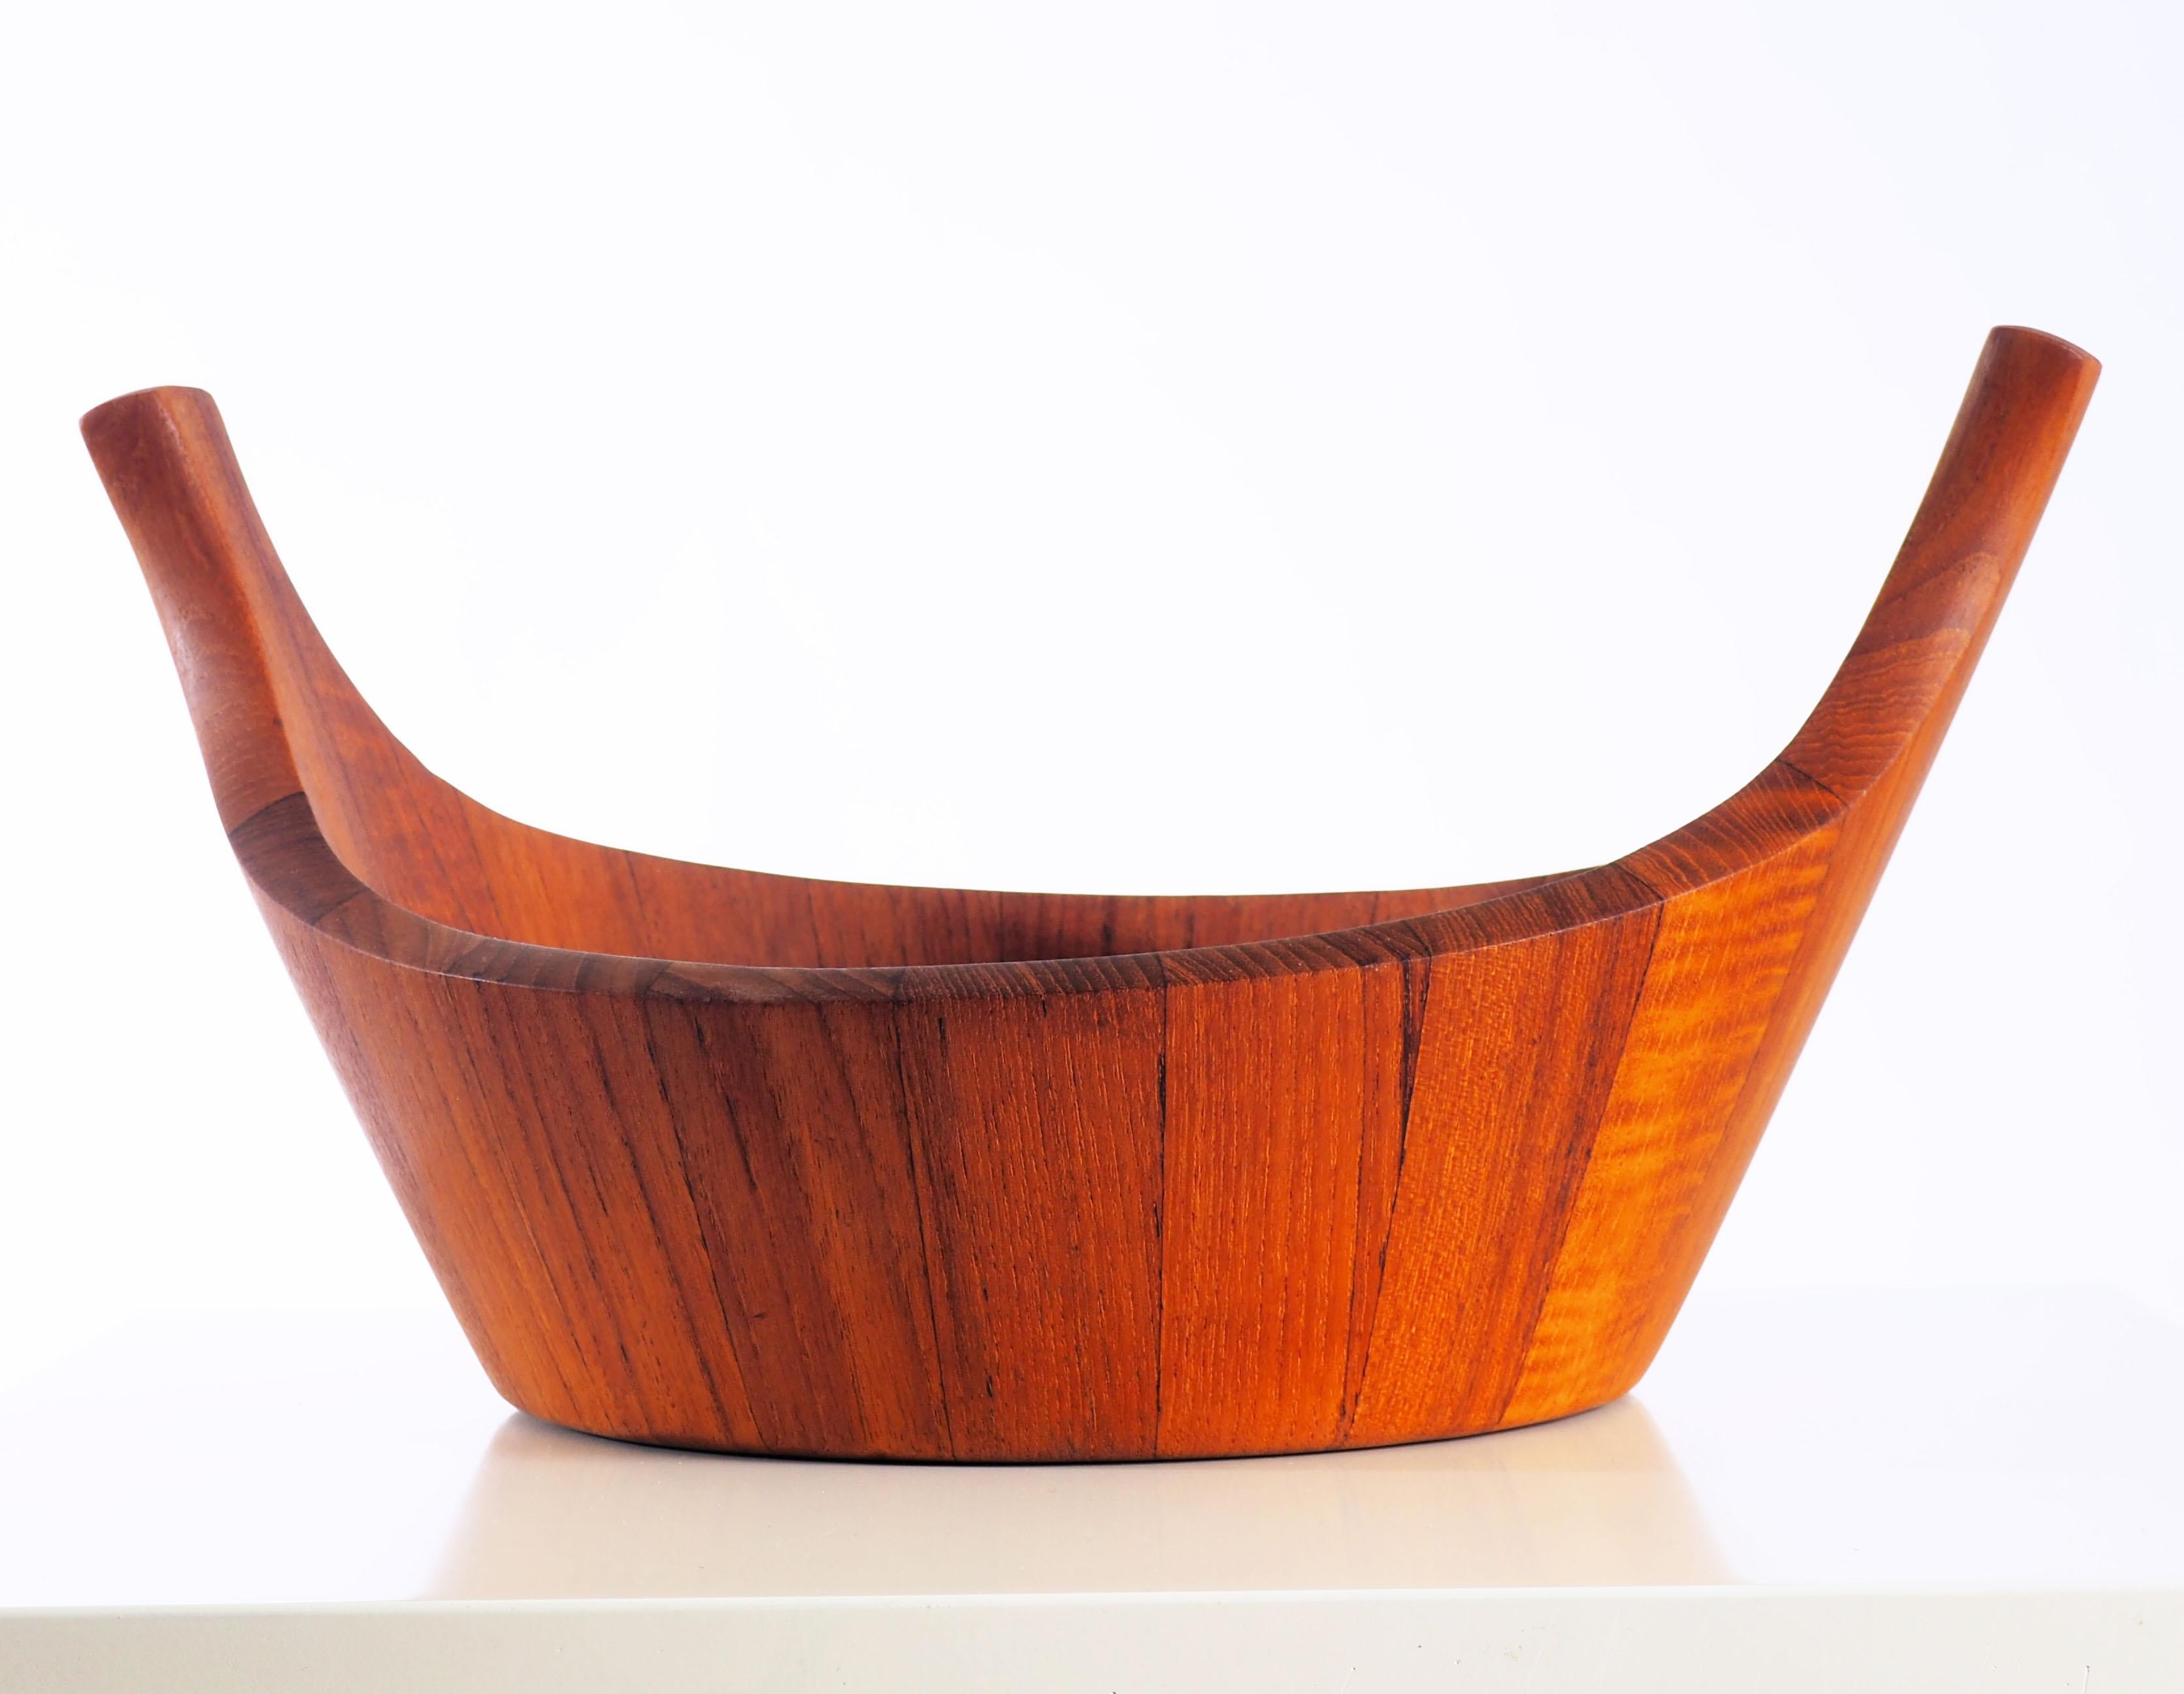 Staved bowl in massive teak by Jens H Quistgaard. Quistgaard designed the bowl for Dansk Designs and was inspired by traditional Nordic rural wooden crafts.

Free shipping worldwide.